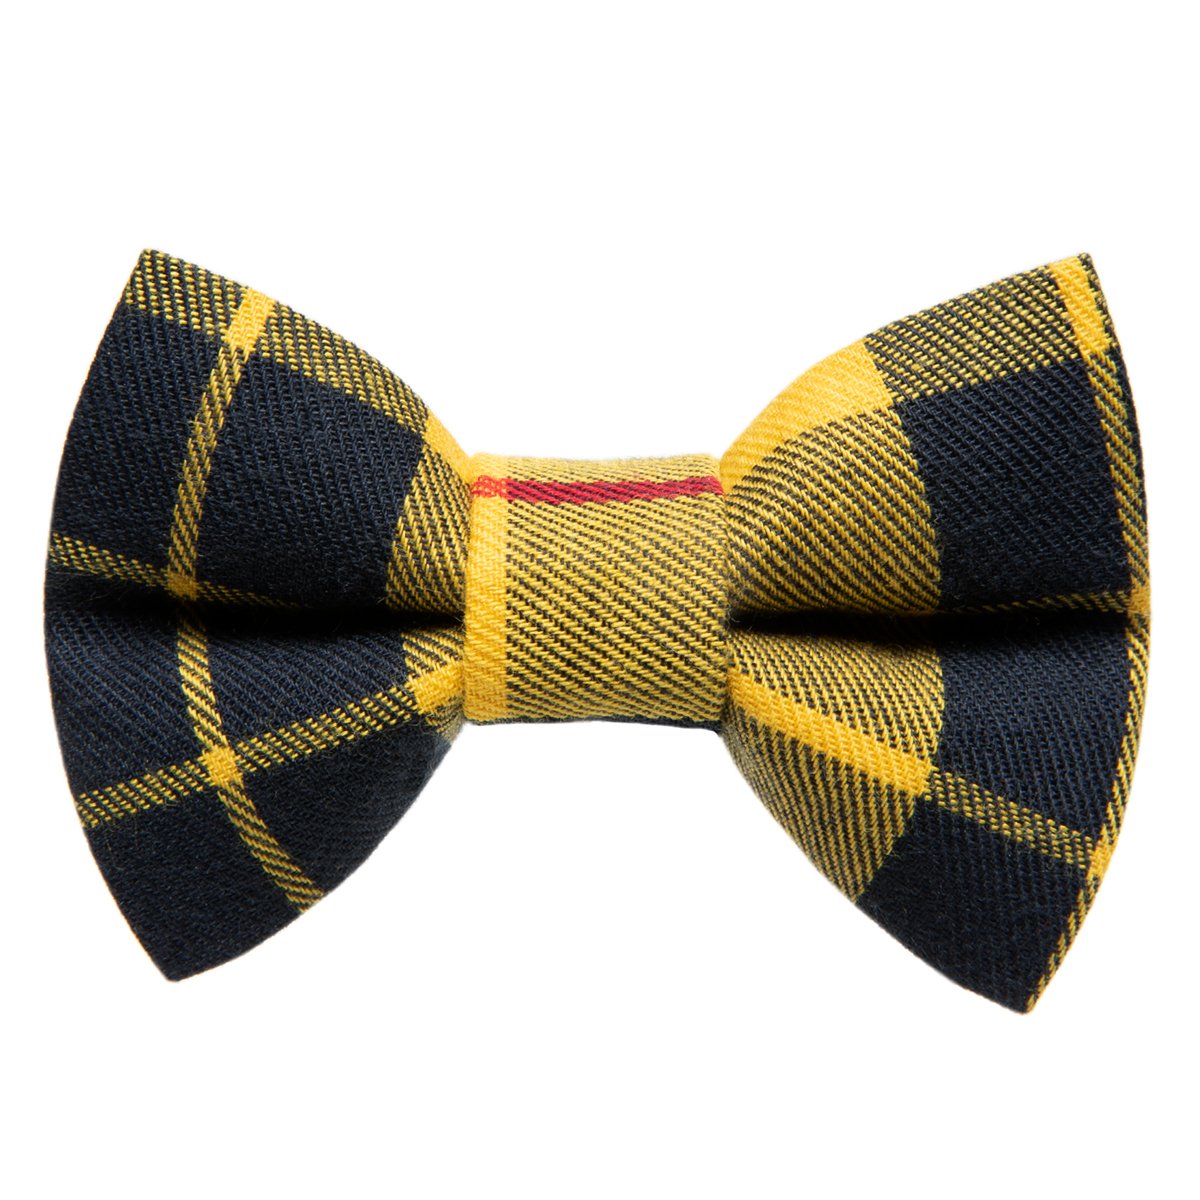 The As If - Cat / Dog Bow Tie